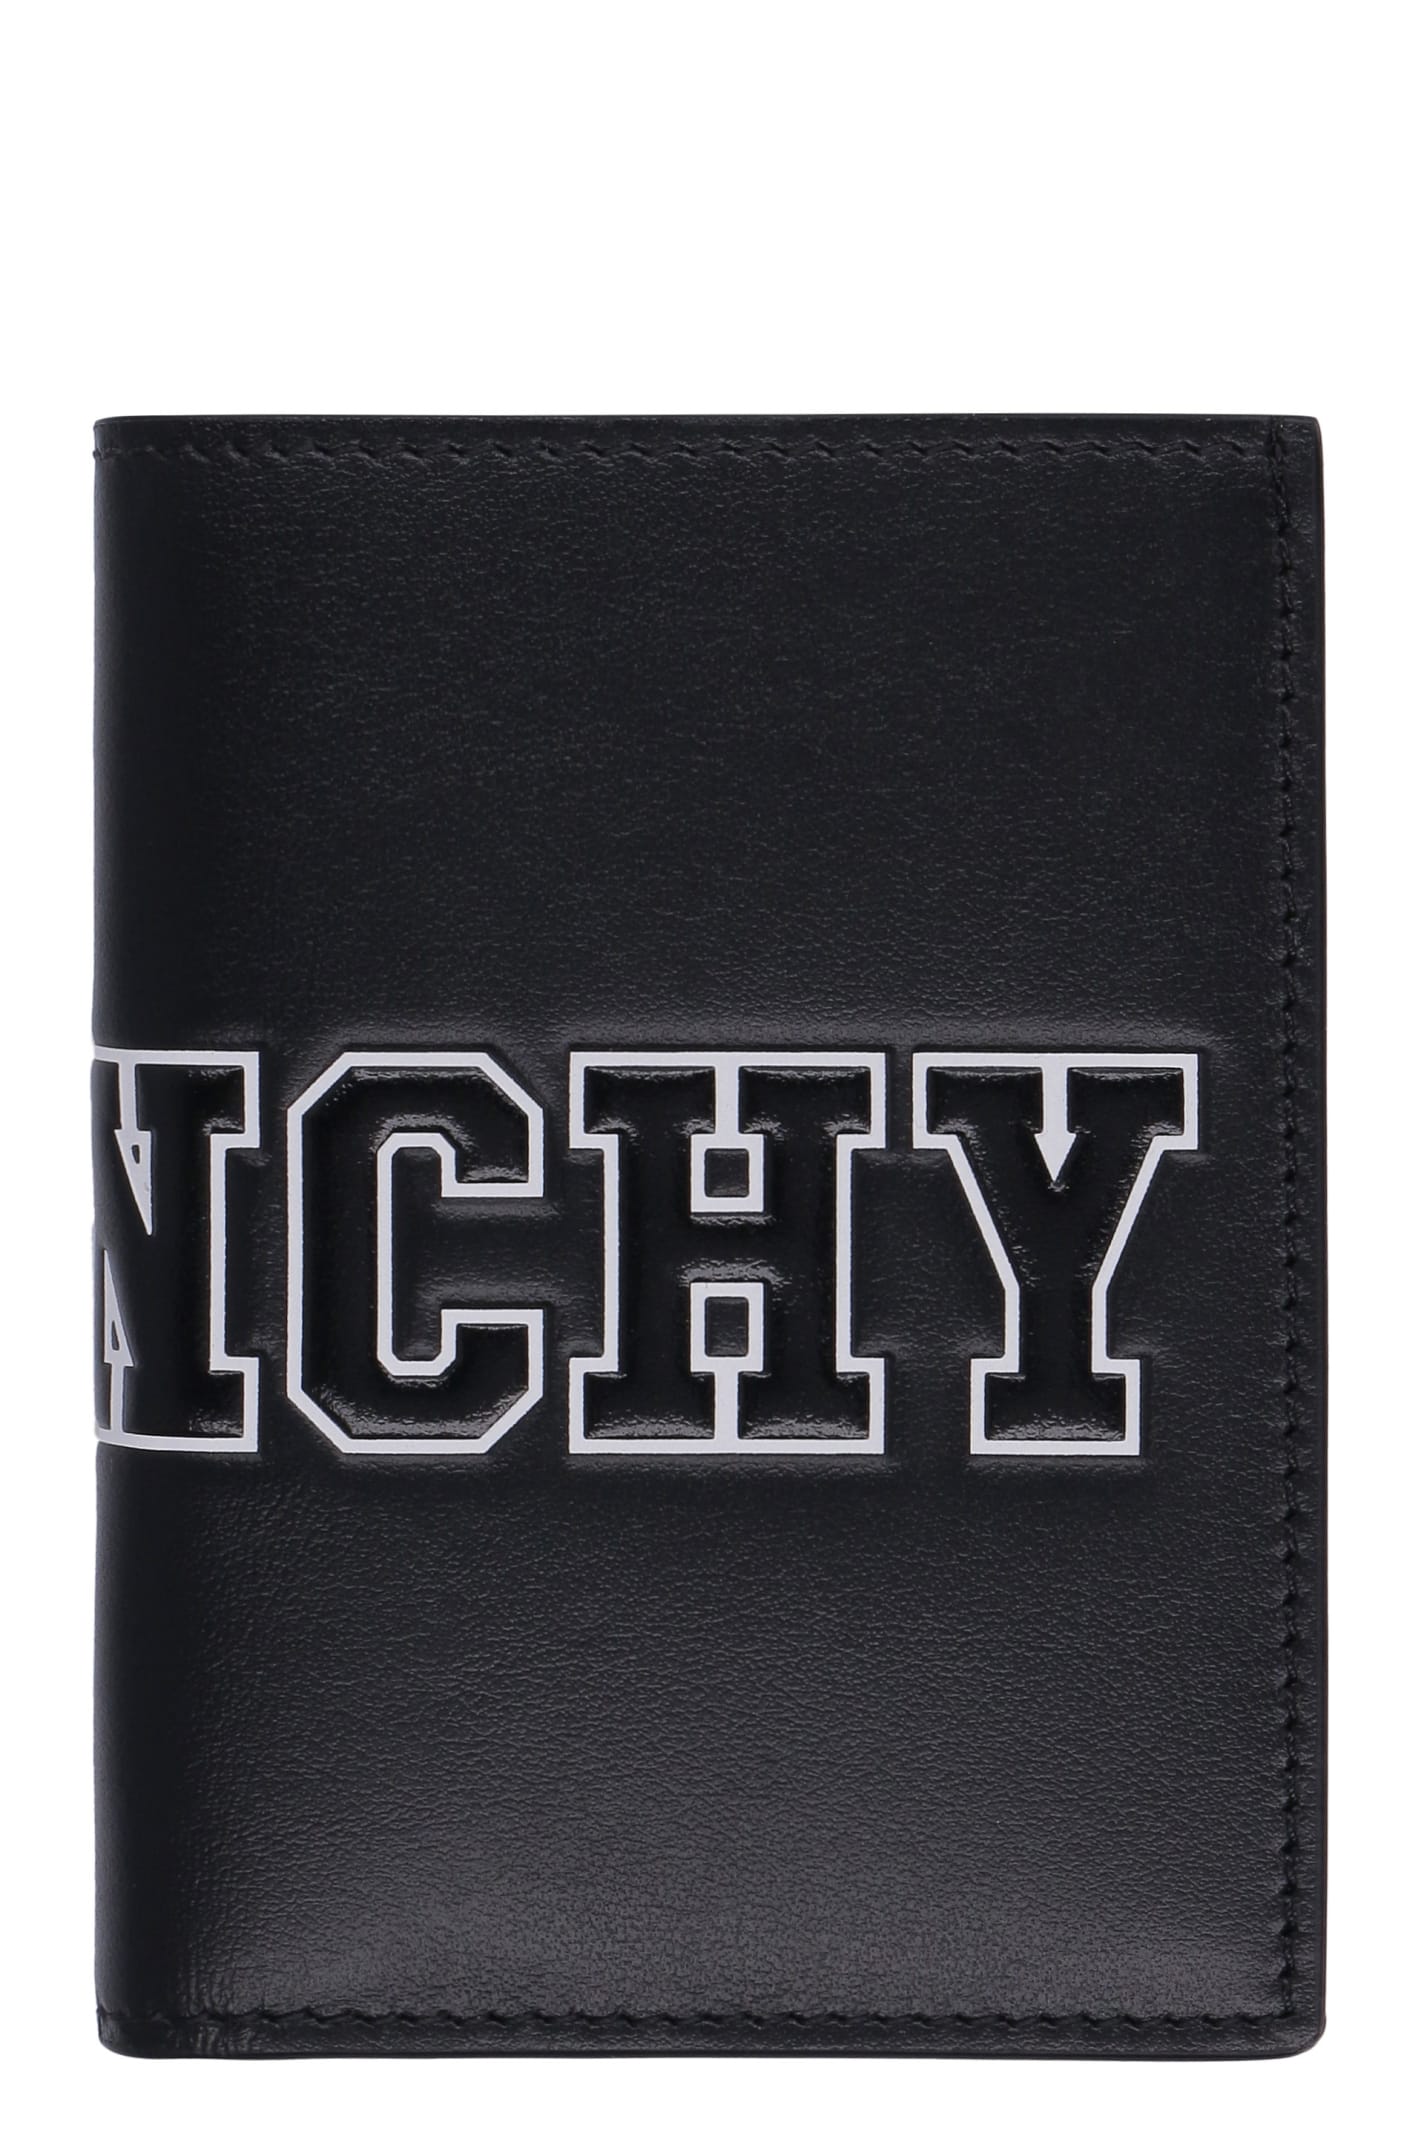 Givenchy Leather Flap-over Wallet